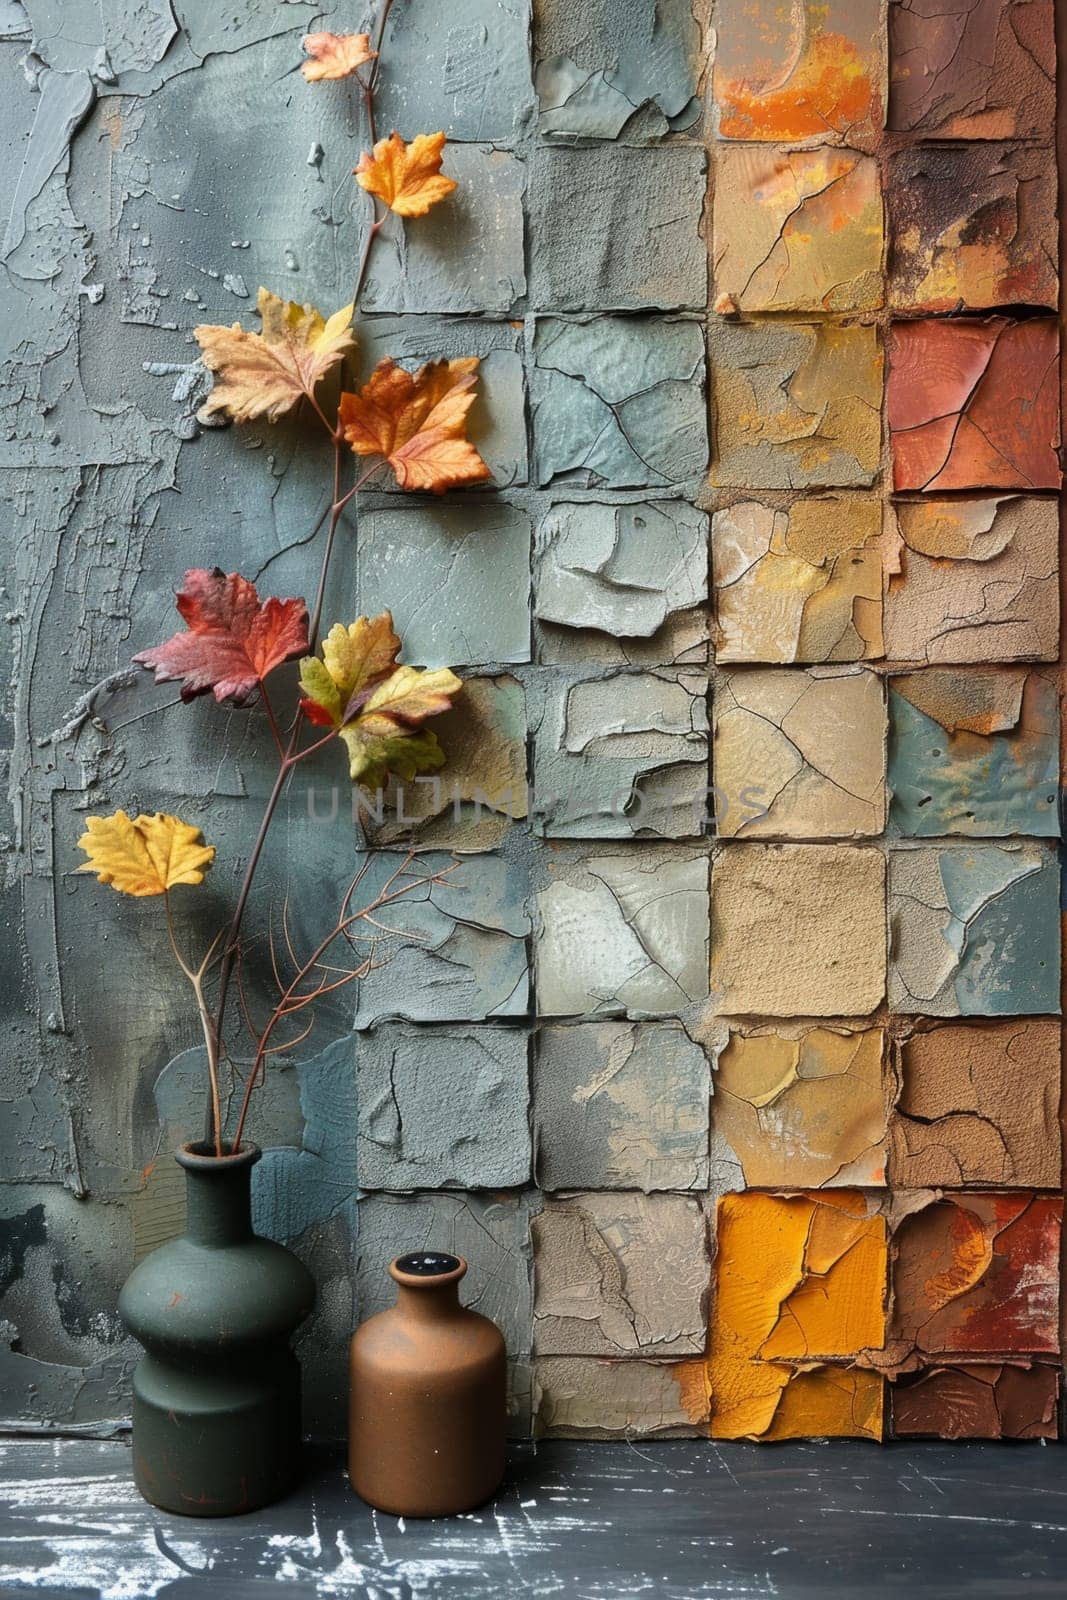 multicolored abstract background with a grunge-style bark texture. Bark background by Lobachad